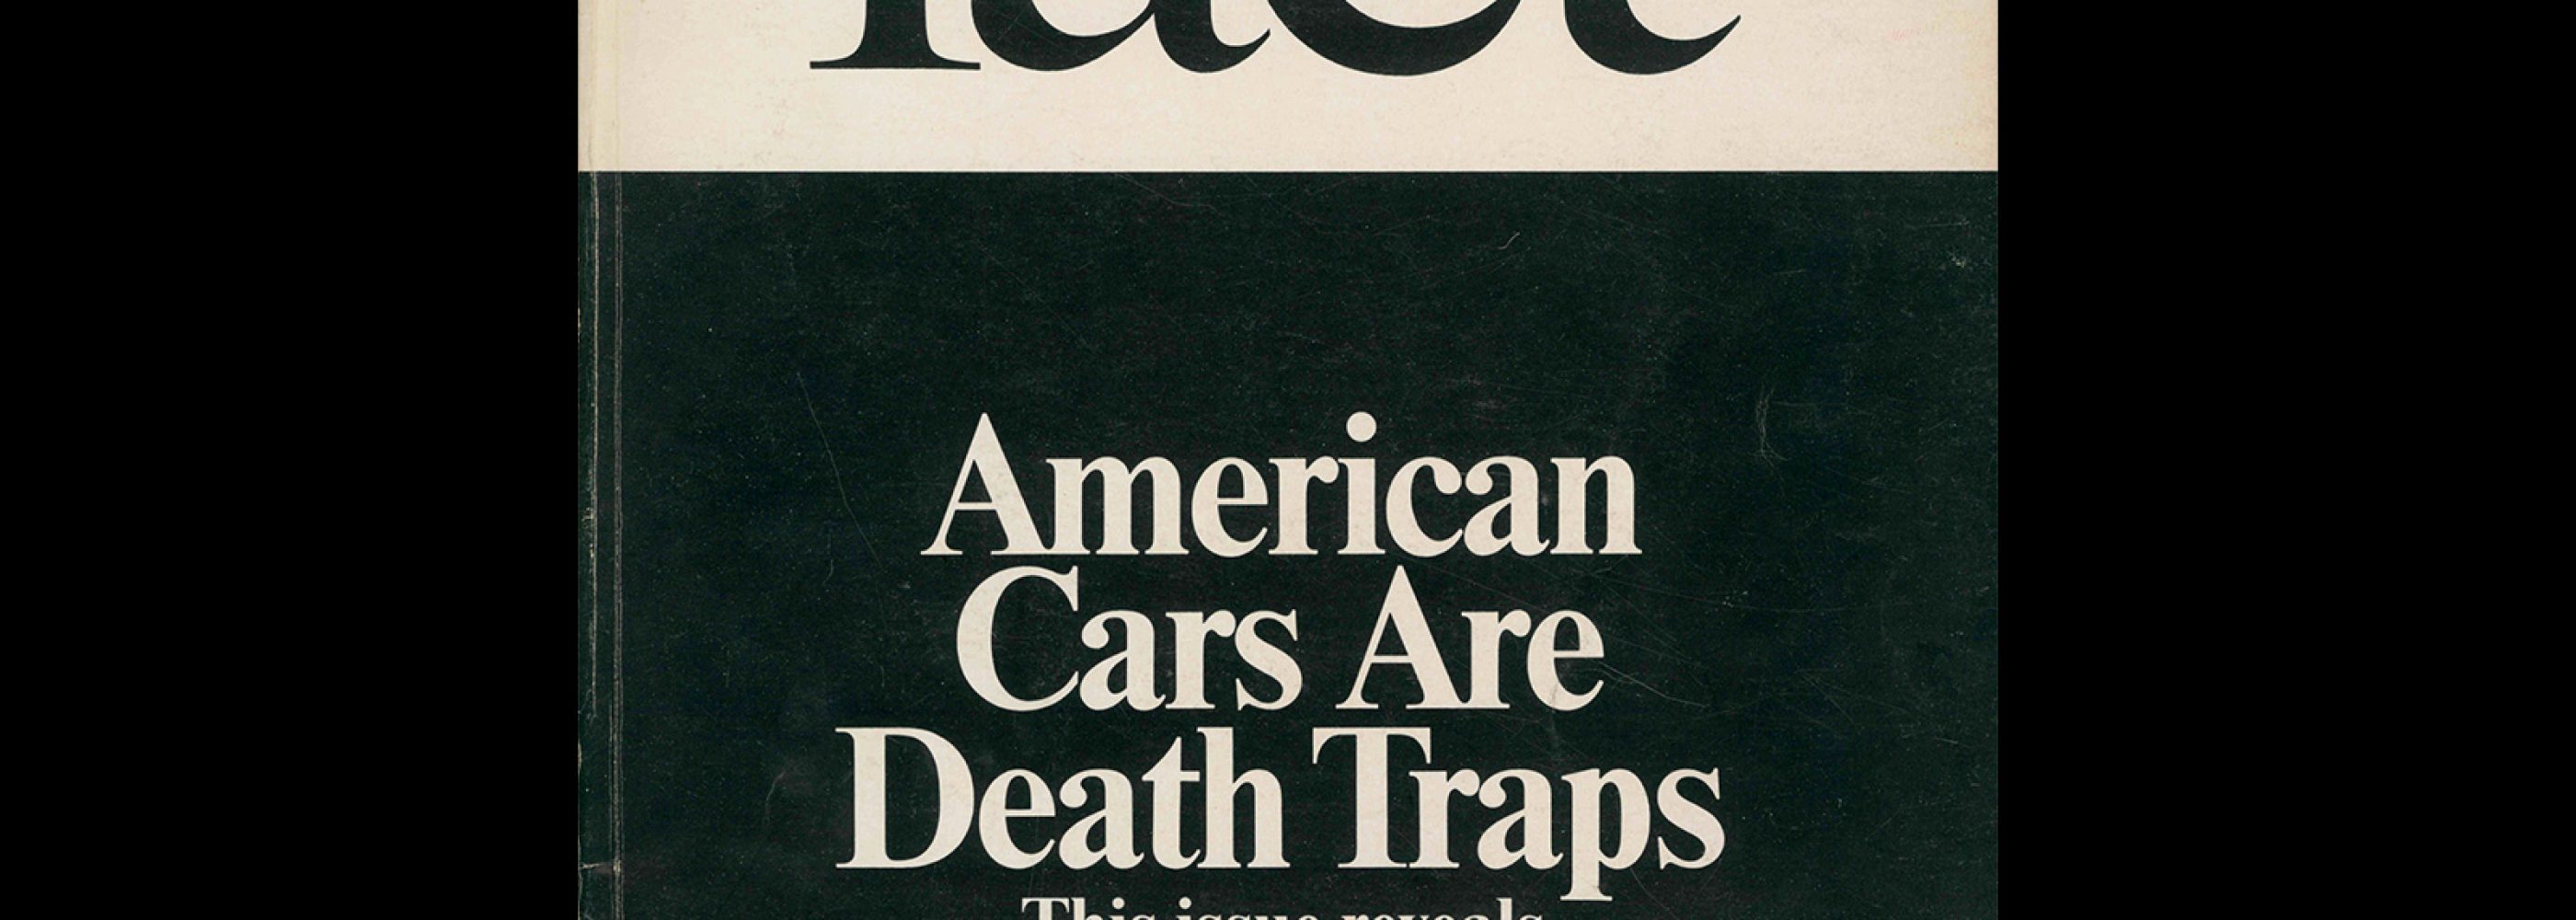 Fact, Volume One, Issue Three, 1964. Designed by Herb Lubalin.